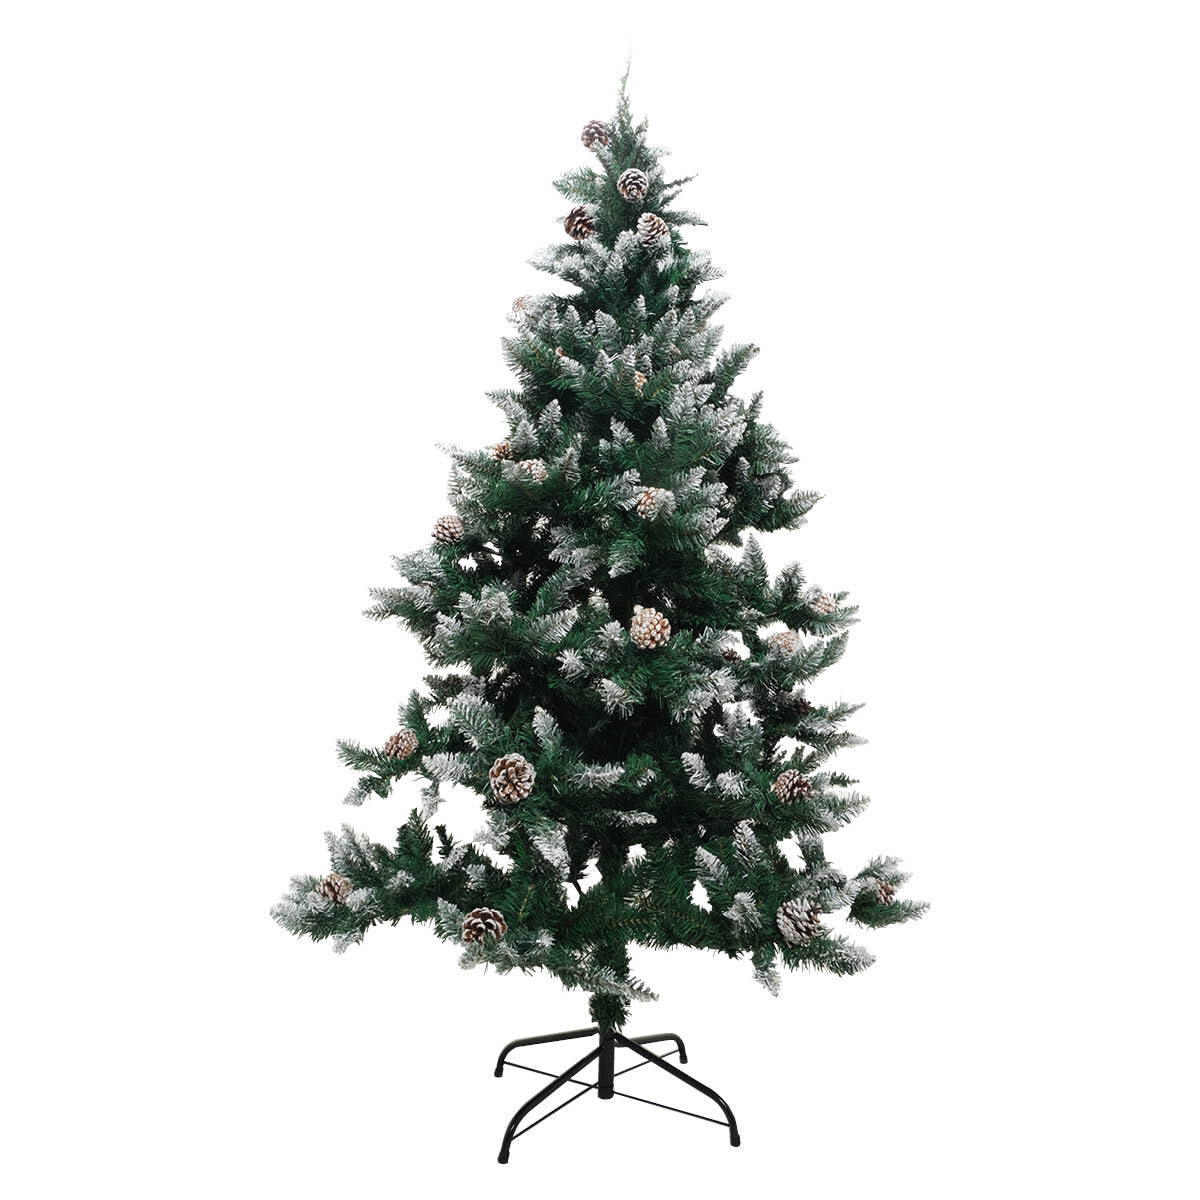 Christmas By Sas 1.8m Full Figured Tree Snow Covered Tips & Pine Cones - Little Kids Business